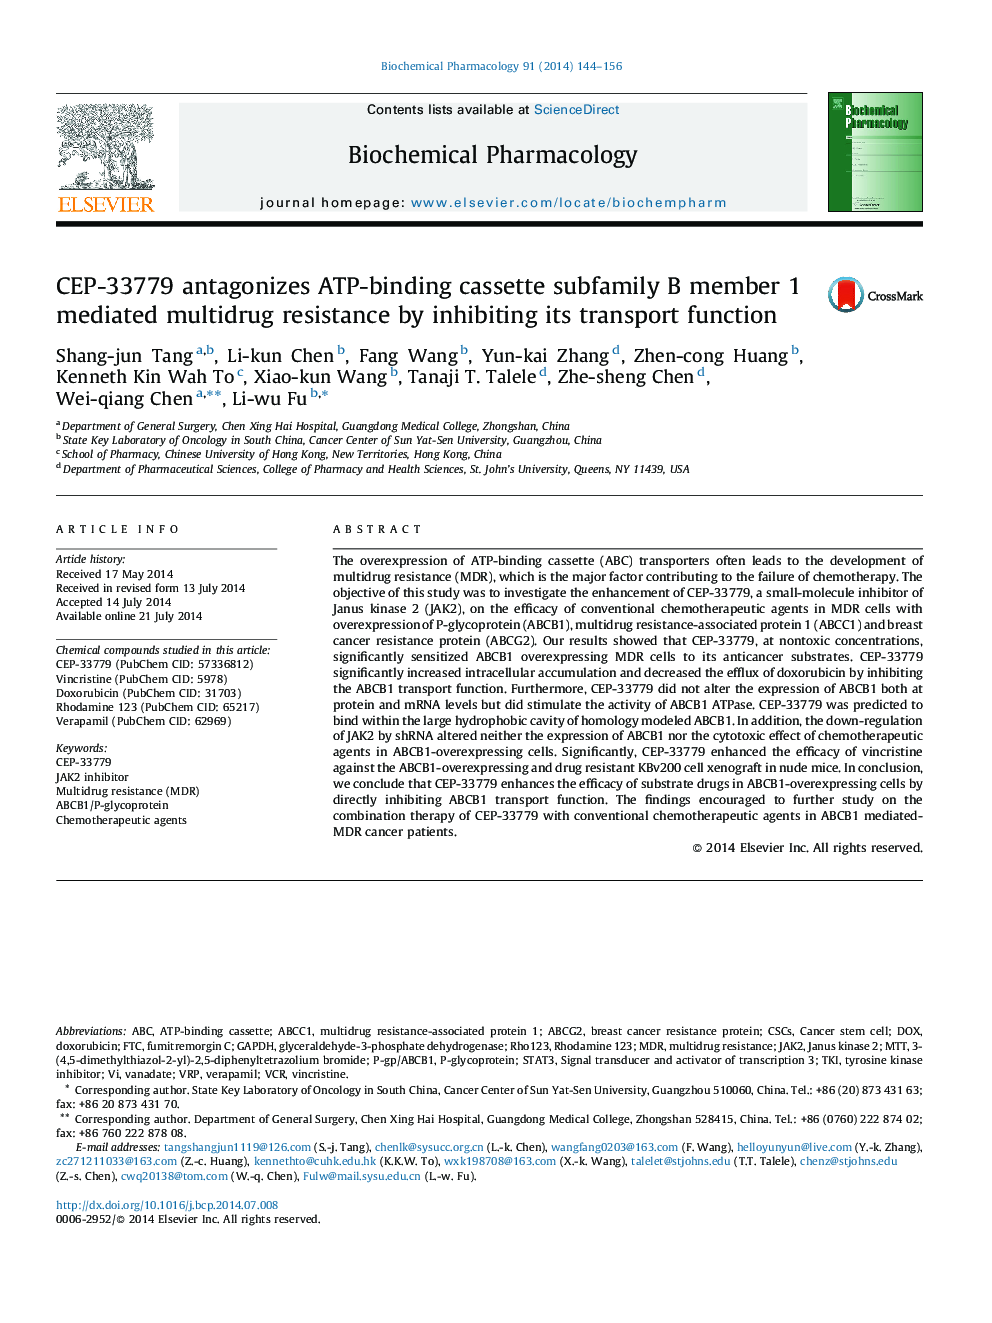 CEP-33779 antagonizes ATP-binding cassette subfamily B member 1 mediated multidrug resistance by inhibiting its transport function